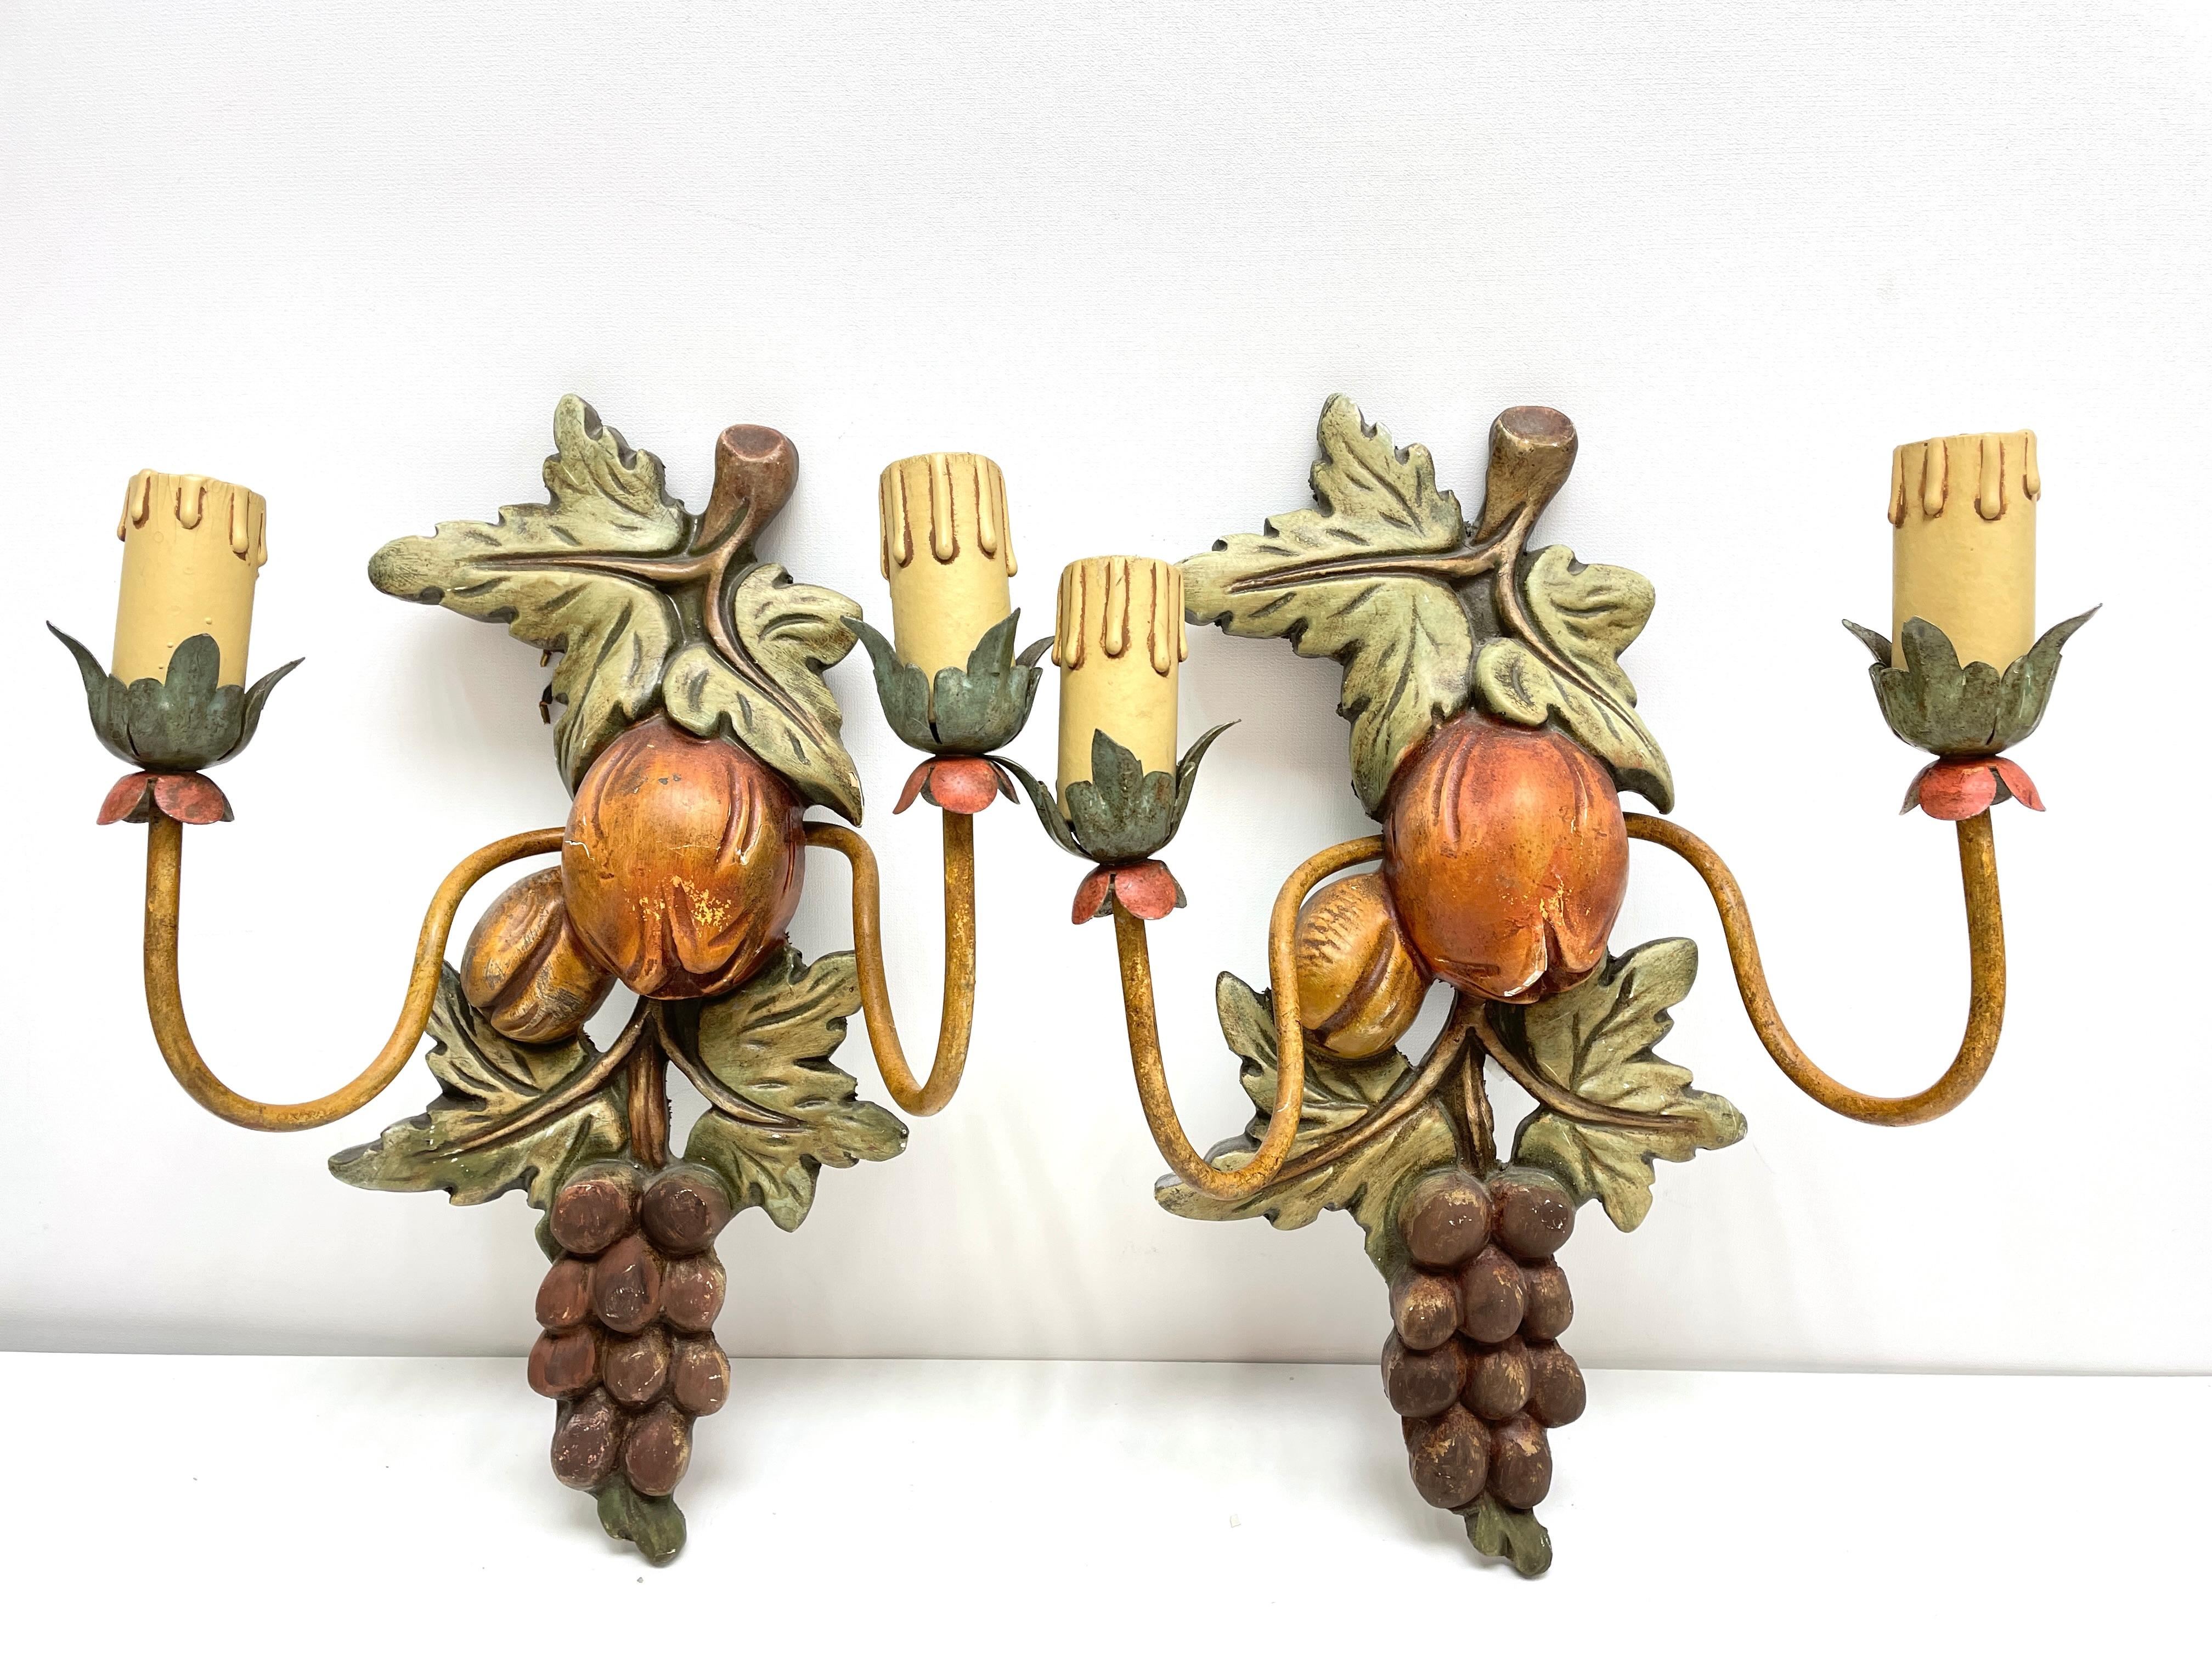 A pair Hollywood Regency midcentury grape, fruits and leaf florentine sconces, each fixture requires two European E14 candelabra bulbs, each up to 40 watts. The wall lights have a beautiful patina and give each room a eclectic statement.